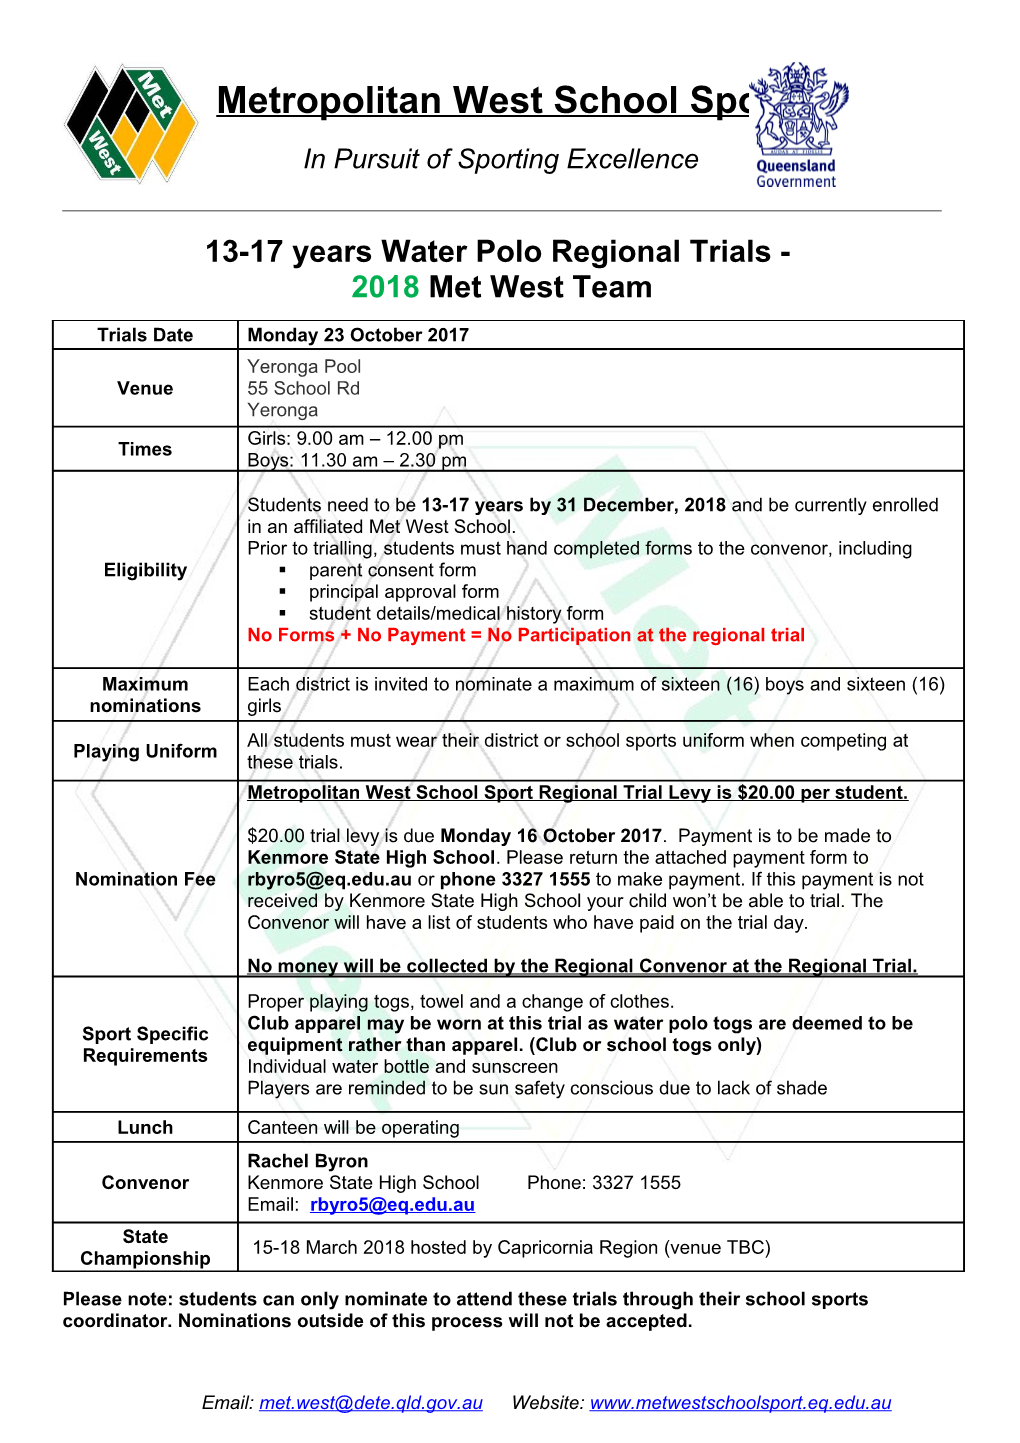 13-17 Years Water Polo Regional Trials